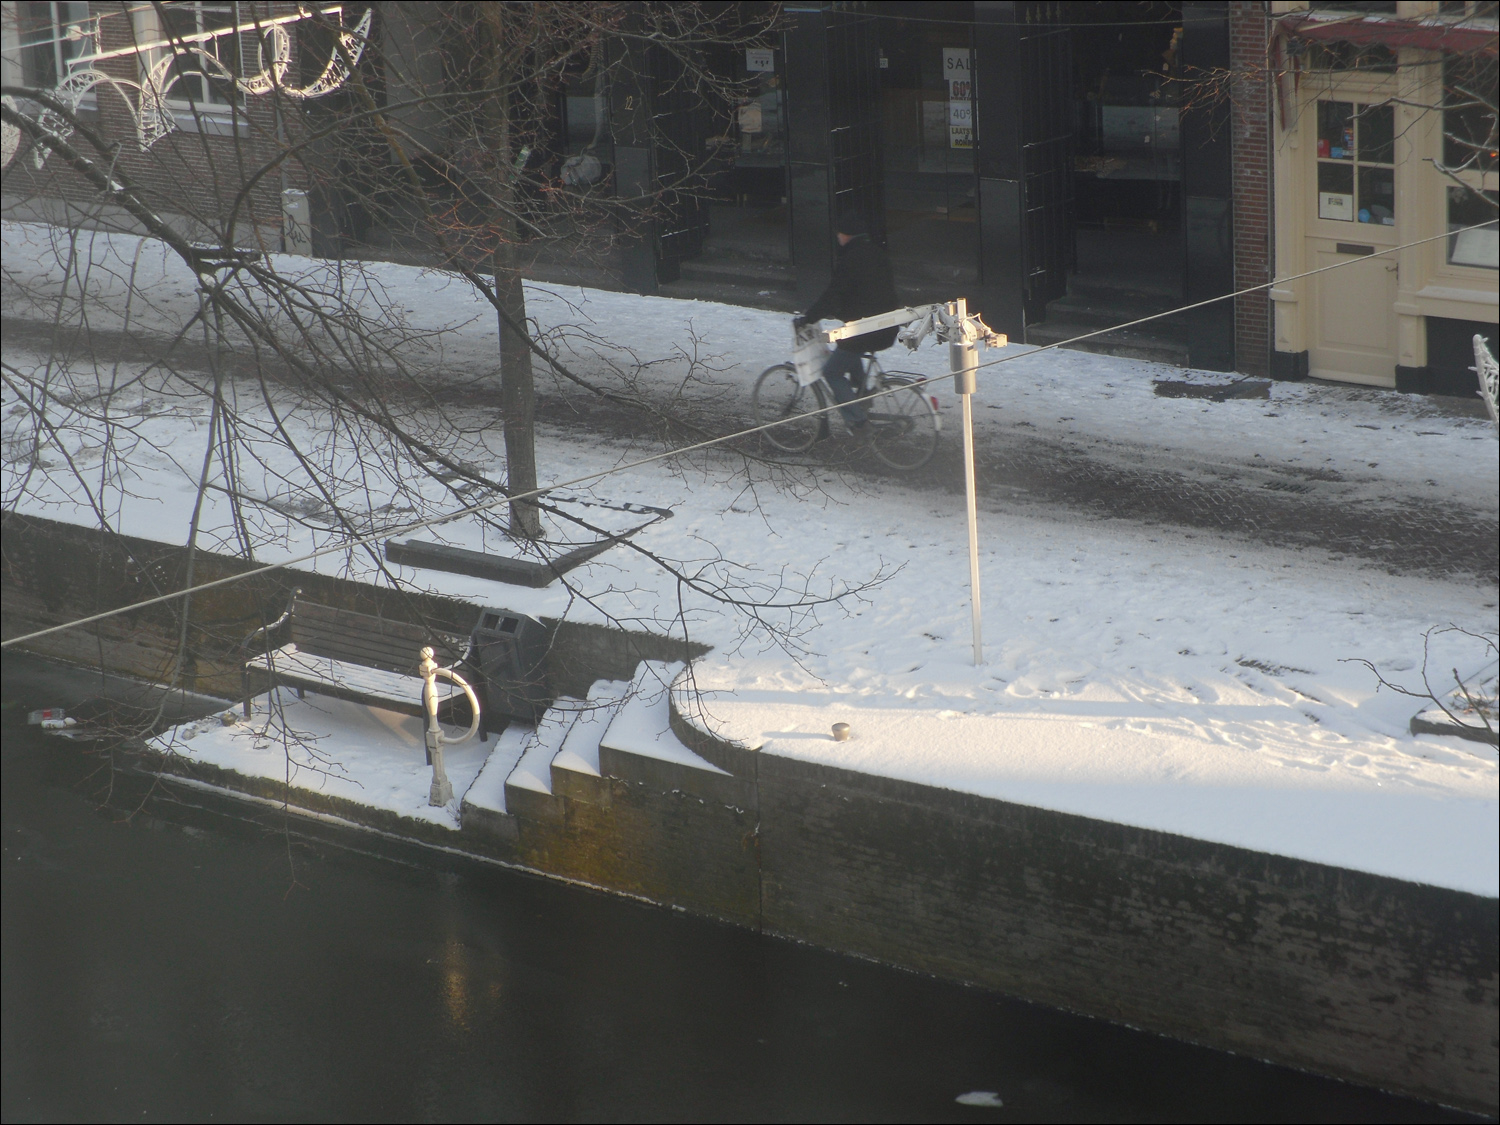 View of Hippolytusbuurt st canal from our dining room following snowfall-this is a water taxi stop